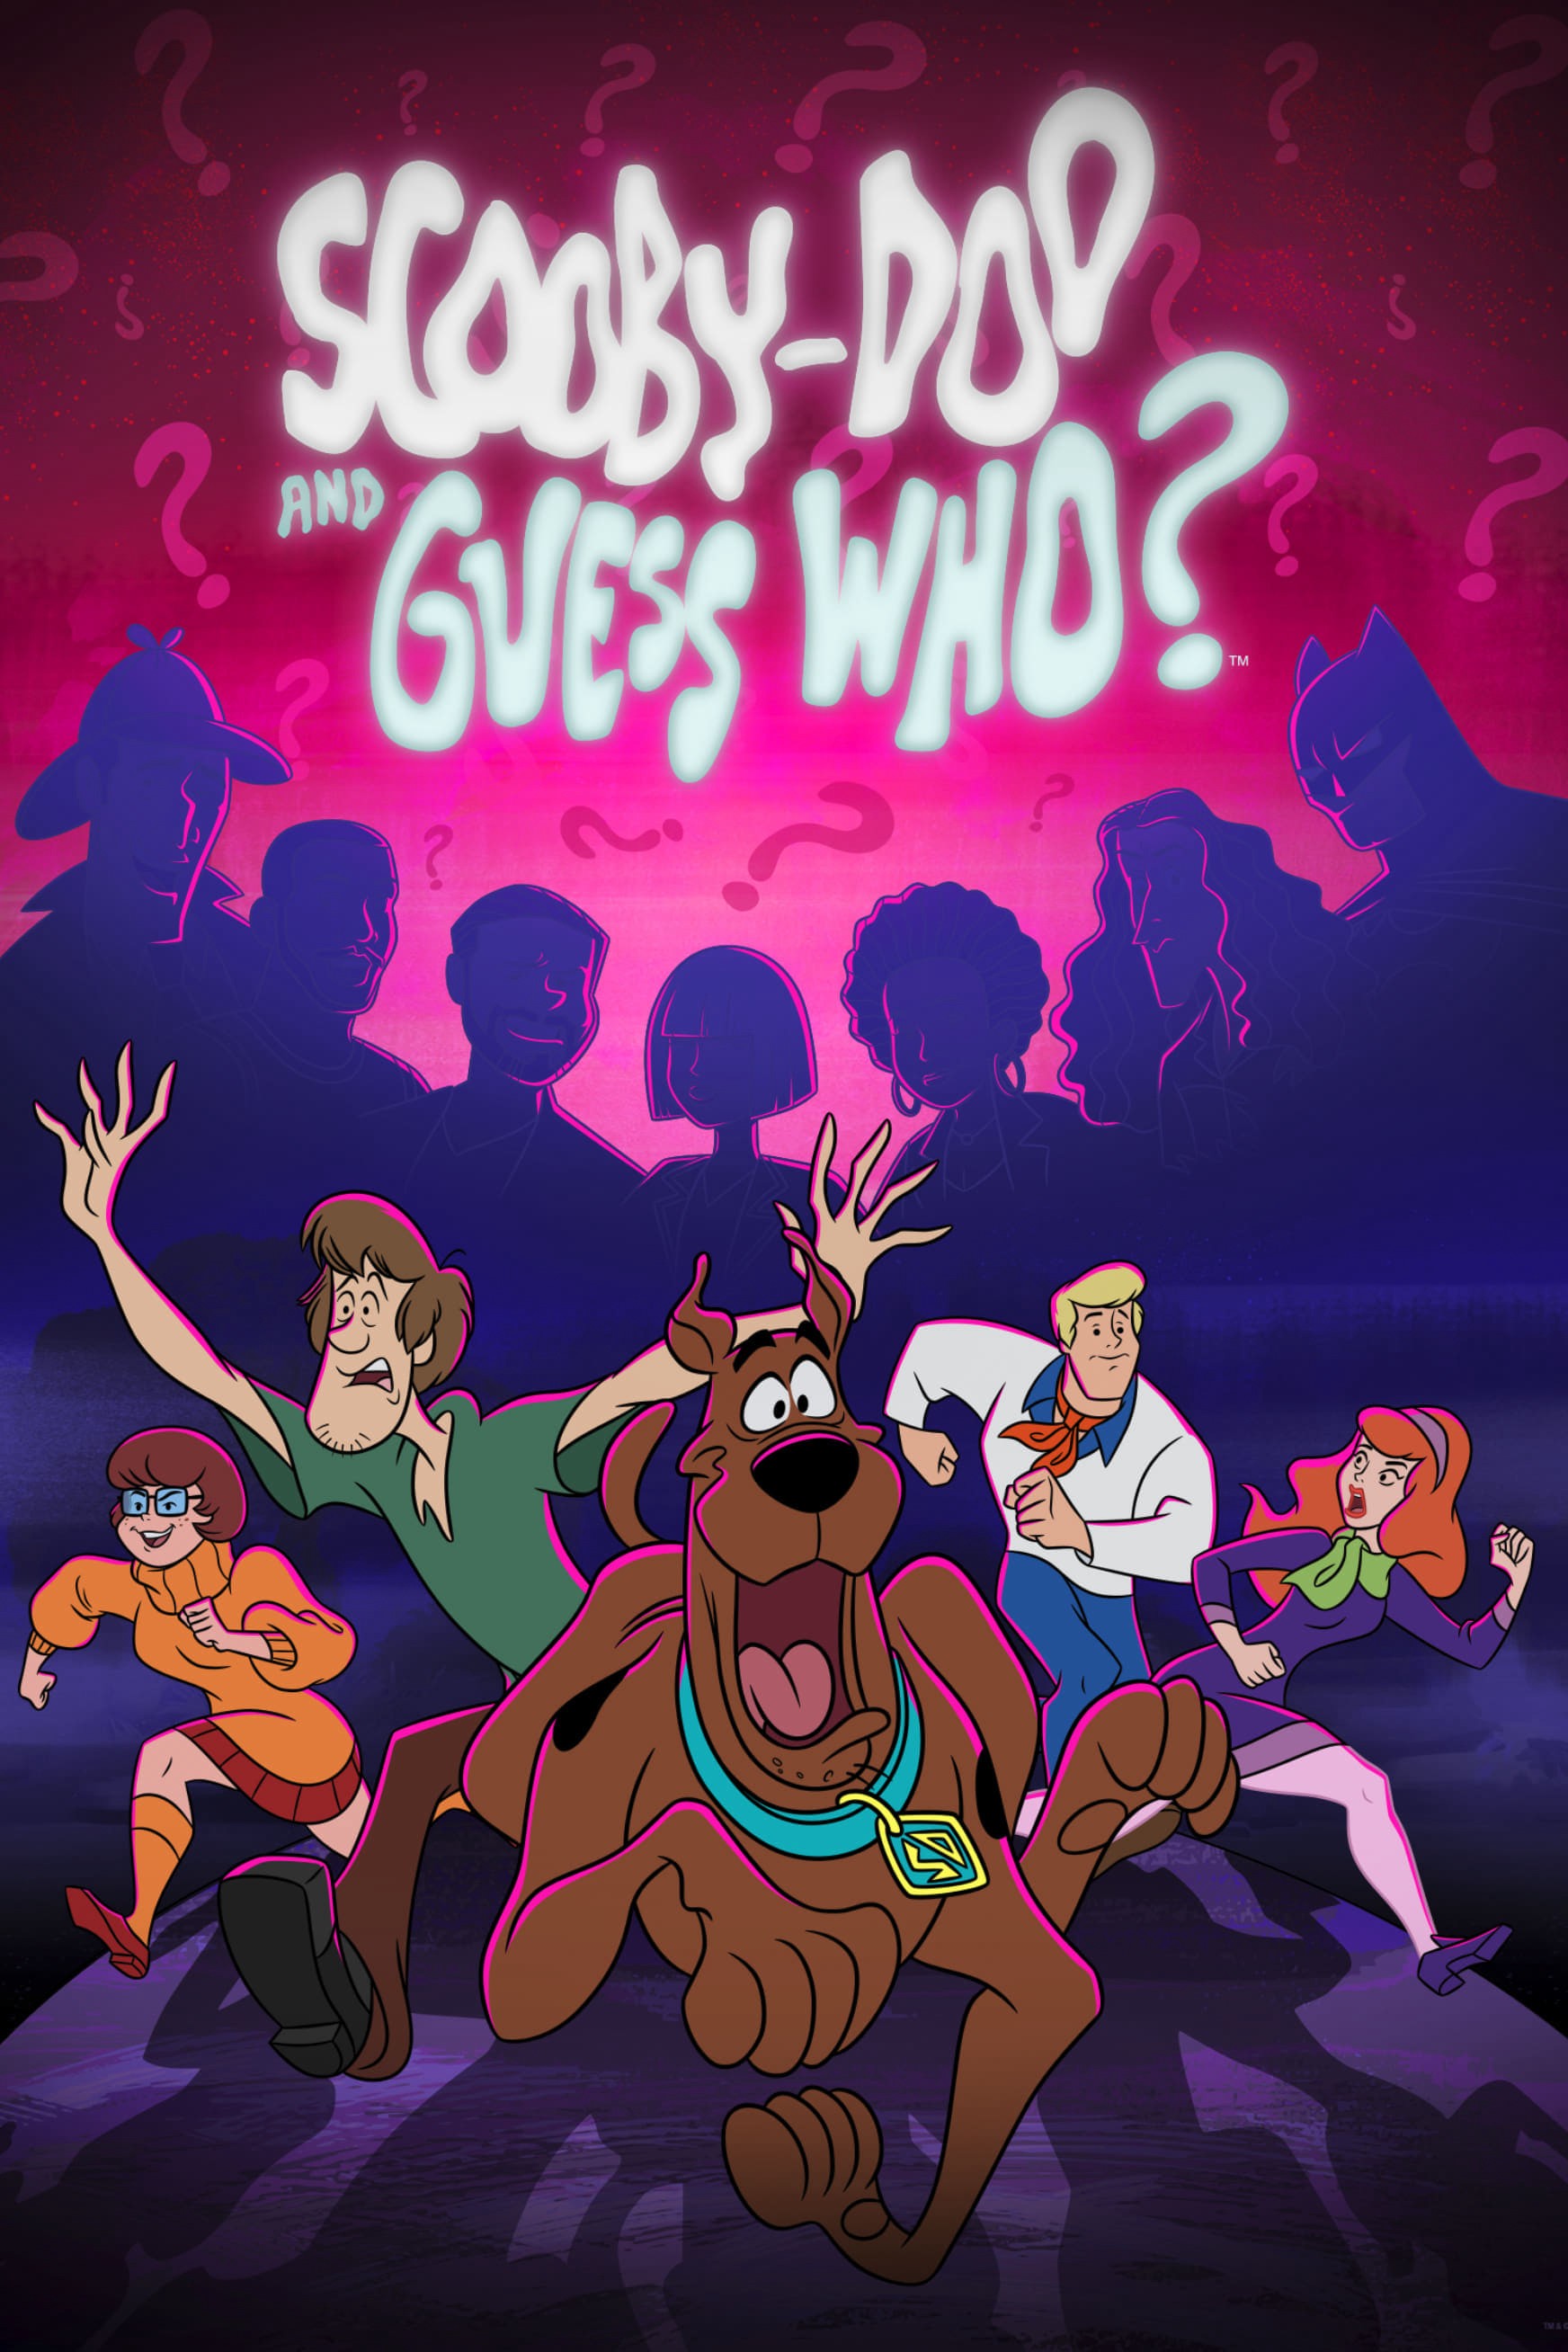 Scooby-Doo and Guess Who? (Phần 1) - Scooby-Doo and Guess Who? (Phần 1) (2019)